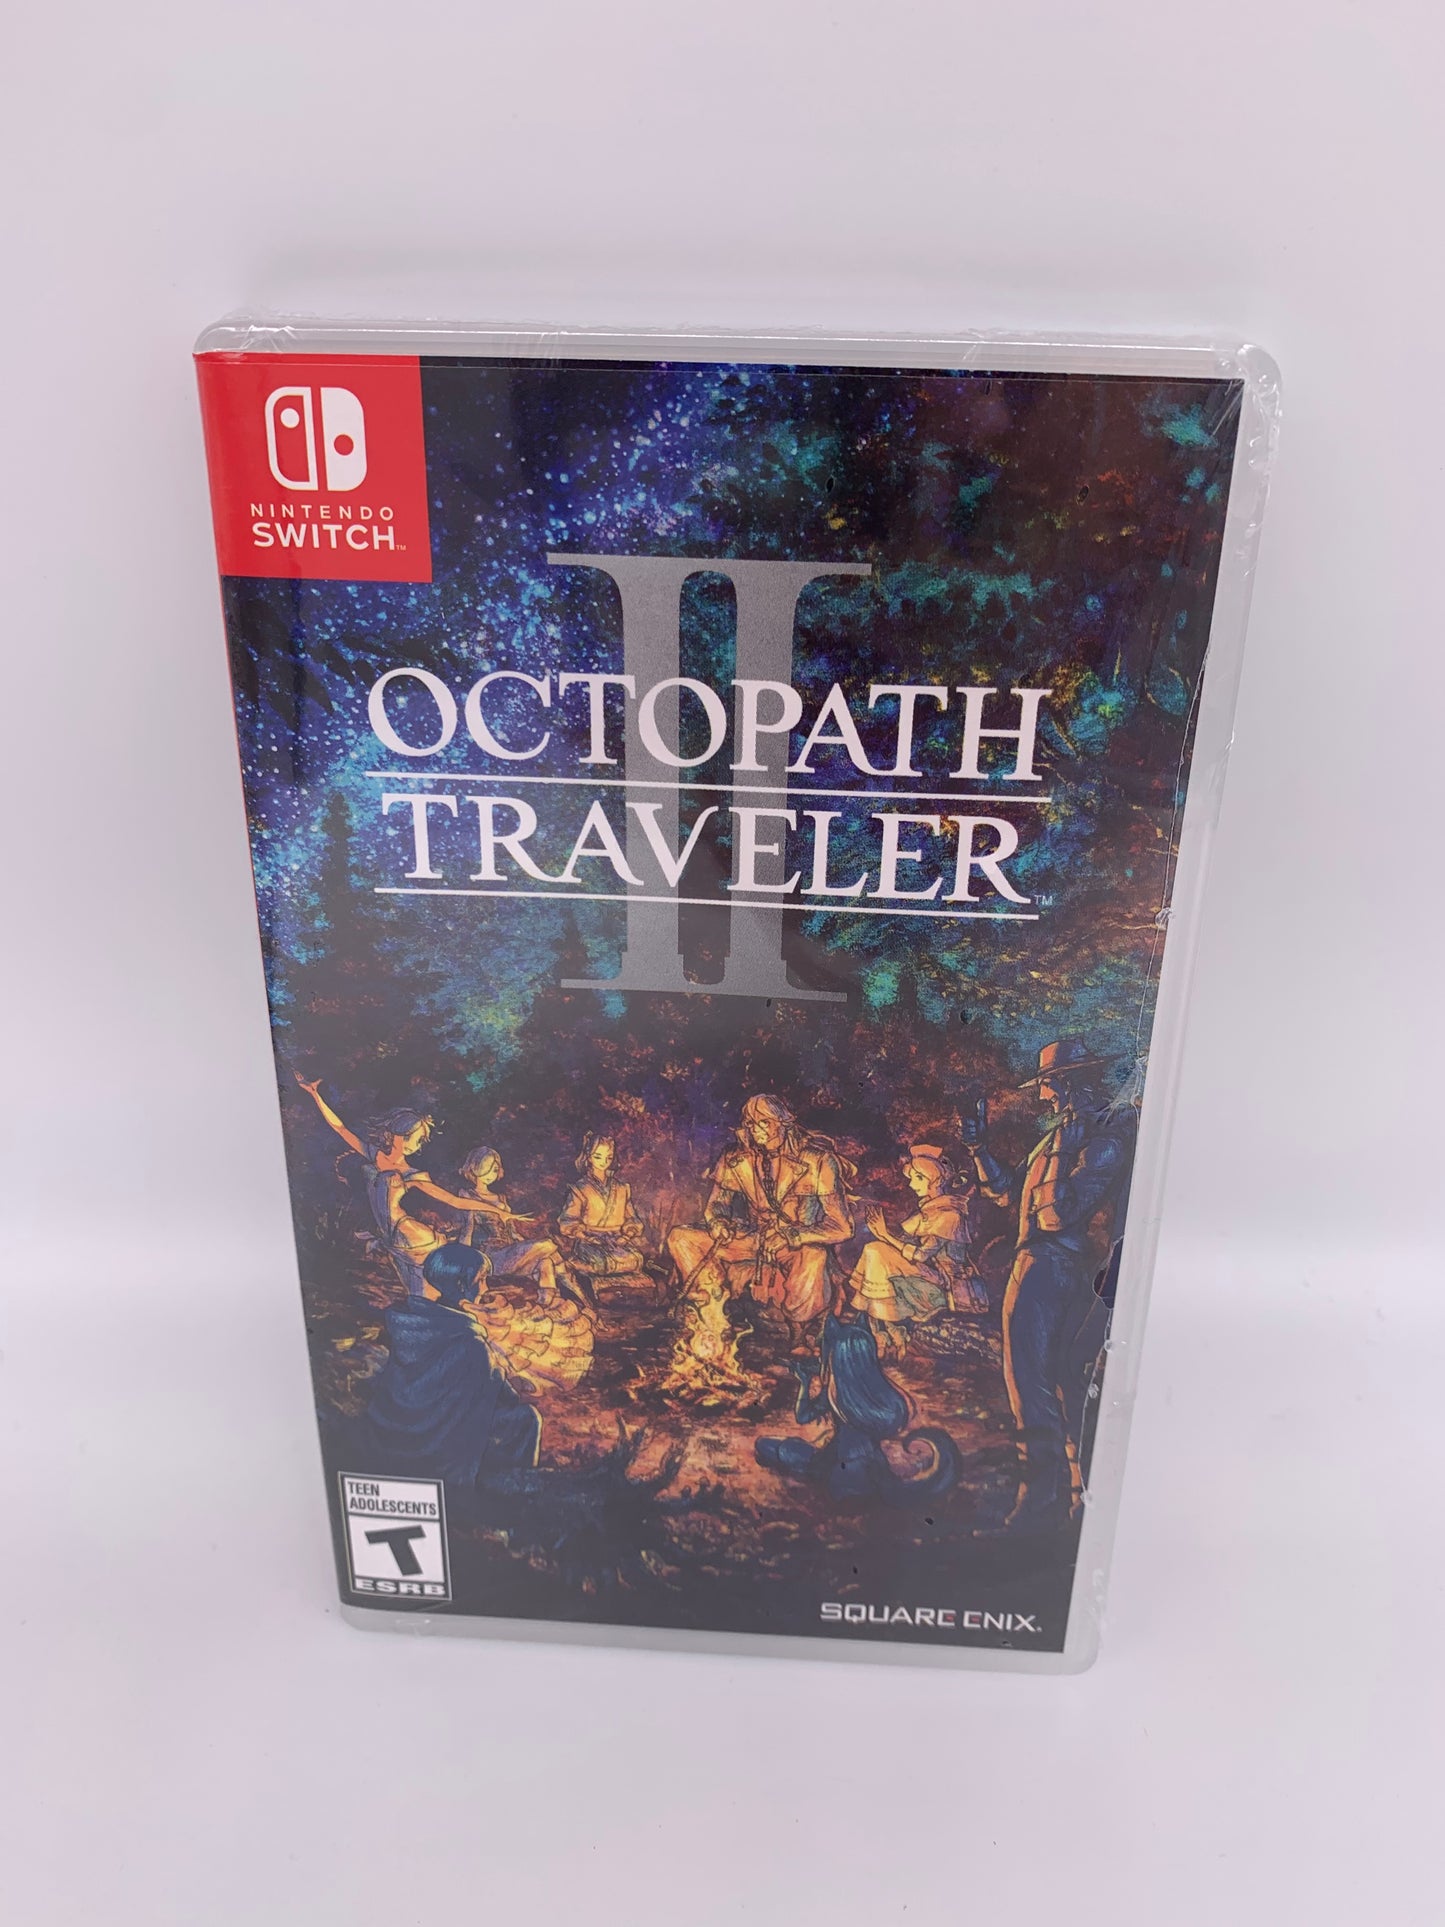 PiXEL-RETRO.COM : NINTENDO SWITCH NEW SEALED IN BOX COMPLETE MANUAL GAME NTSC OCTOPATH TRAVELER II